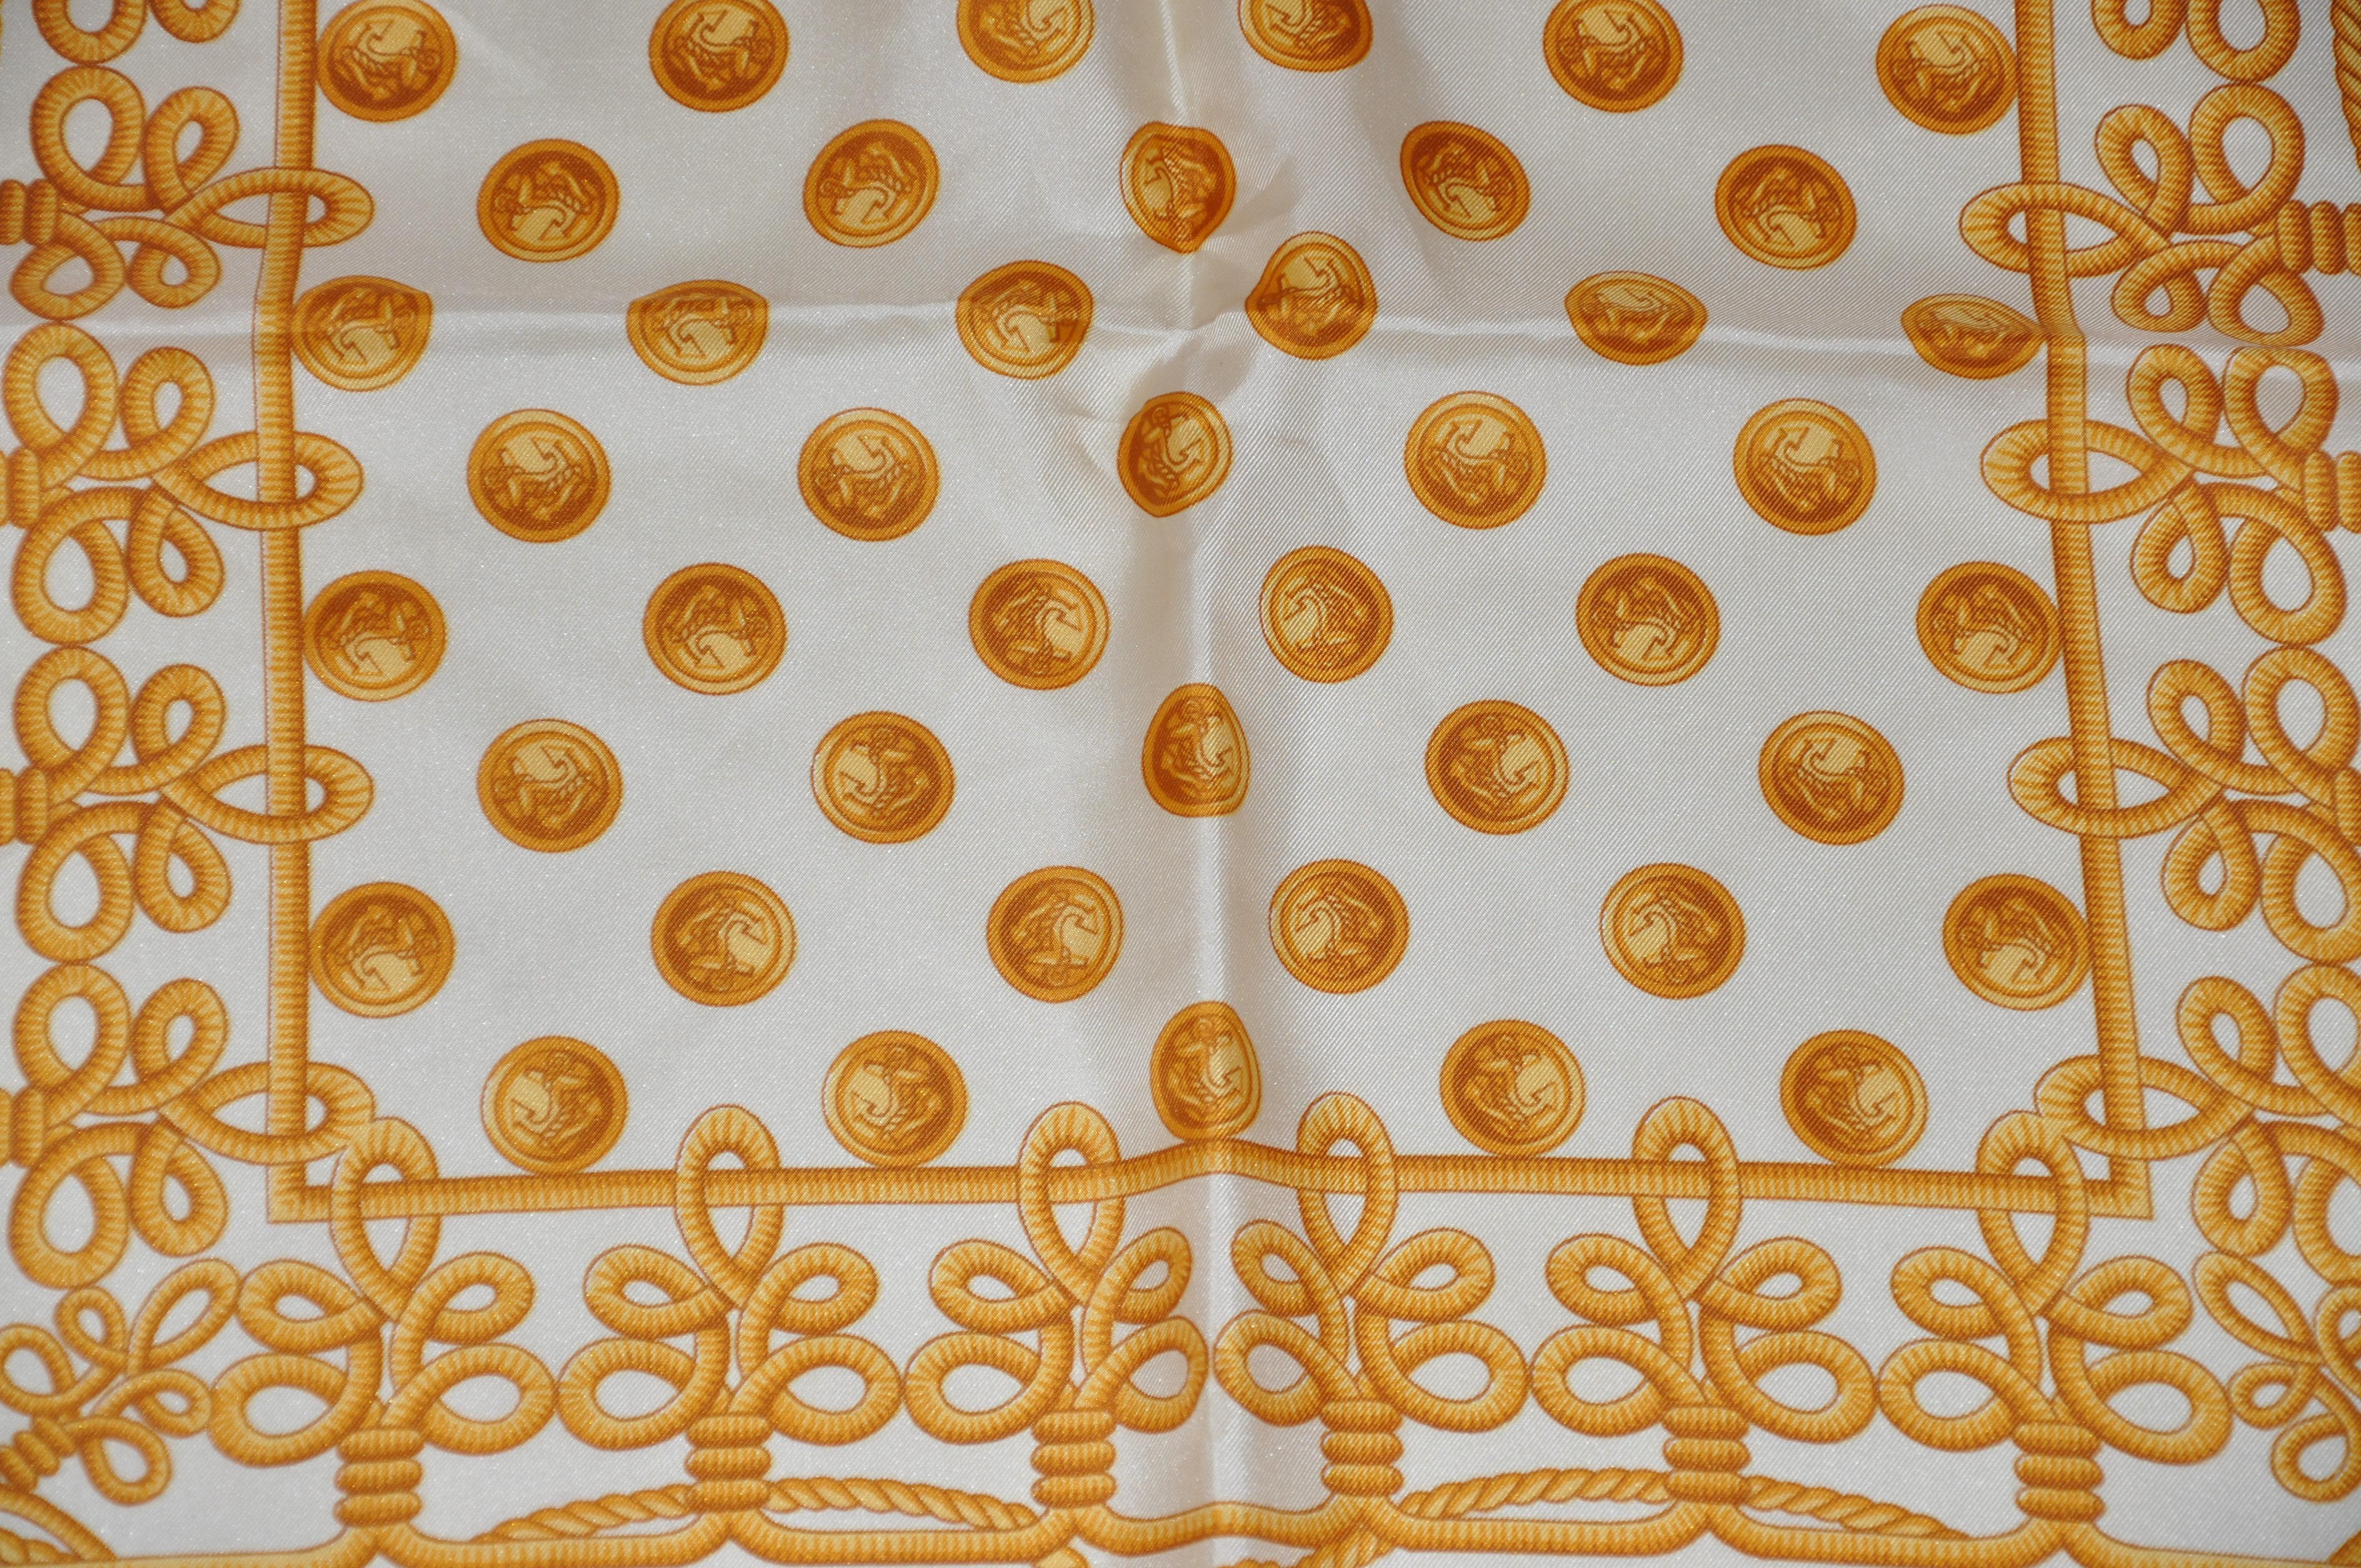 This wonderfully vivid and bold golden navel ribbons and brass buttons silk scarf is finished with hand-rolled edges and measures 34 inches by 35 inches. Made in Italy.